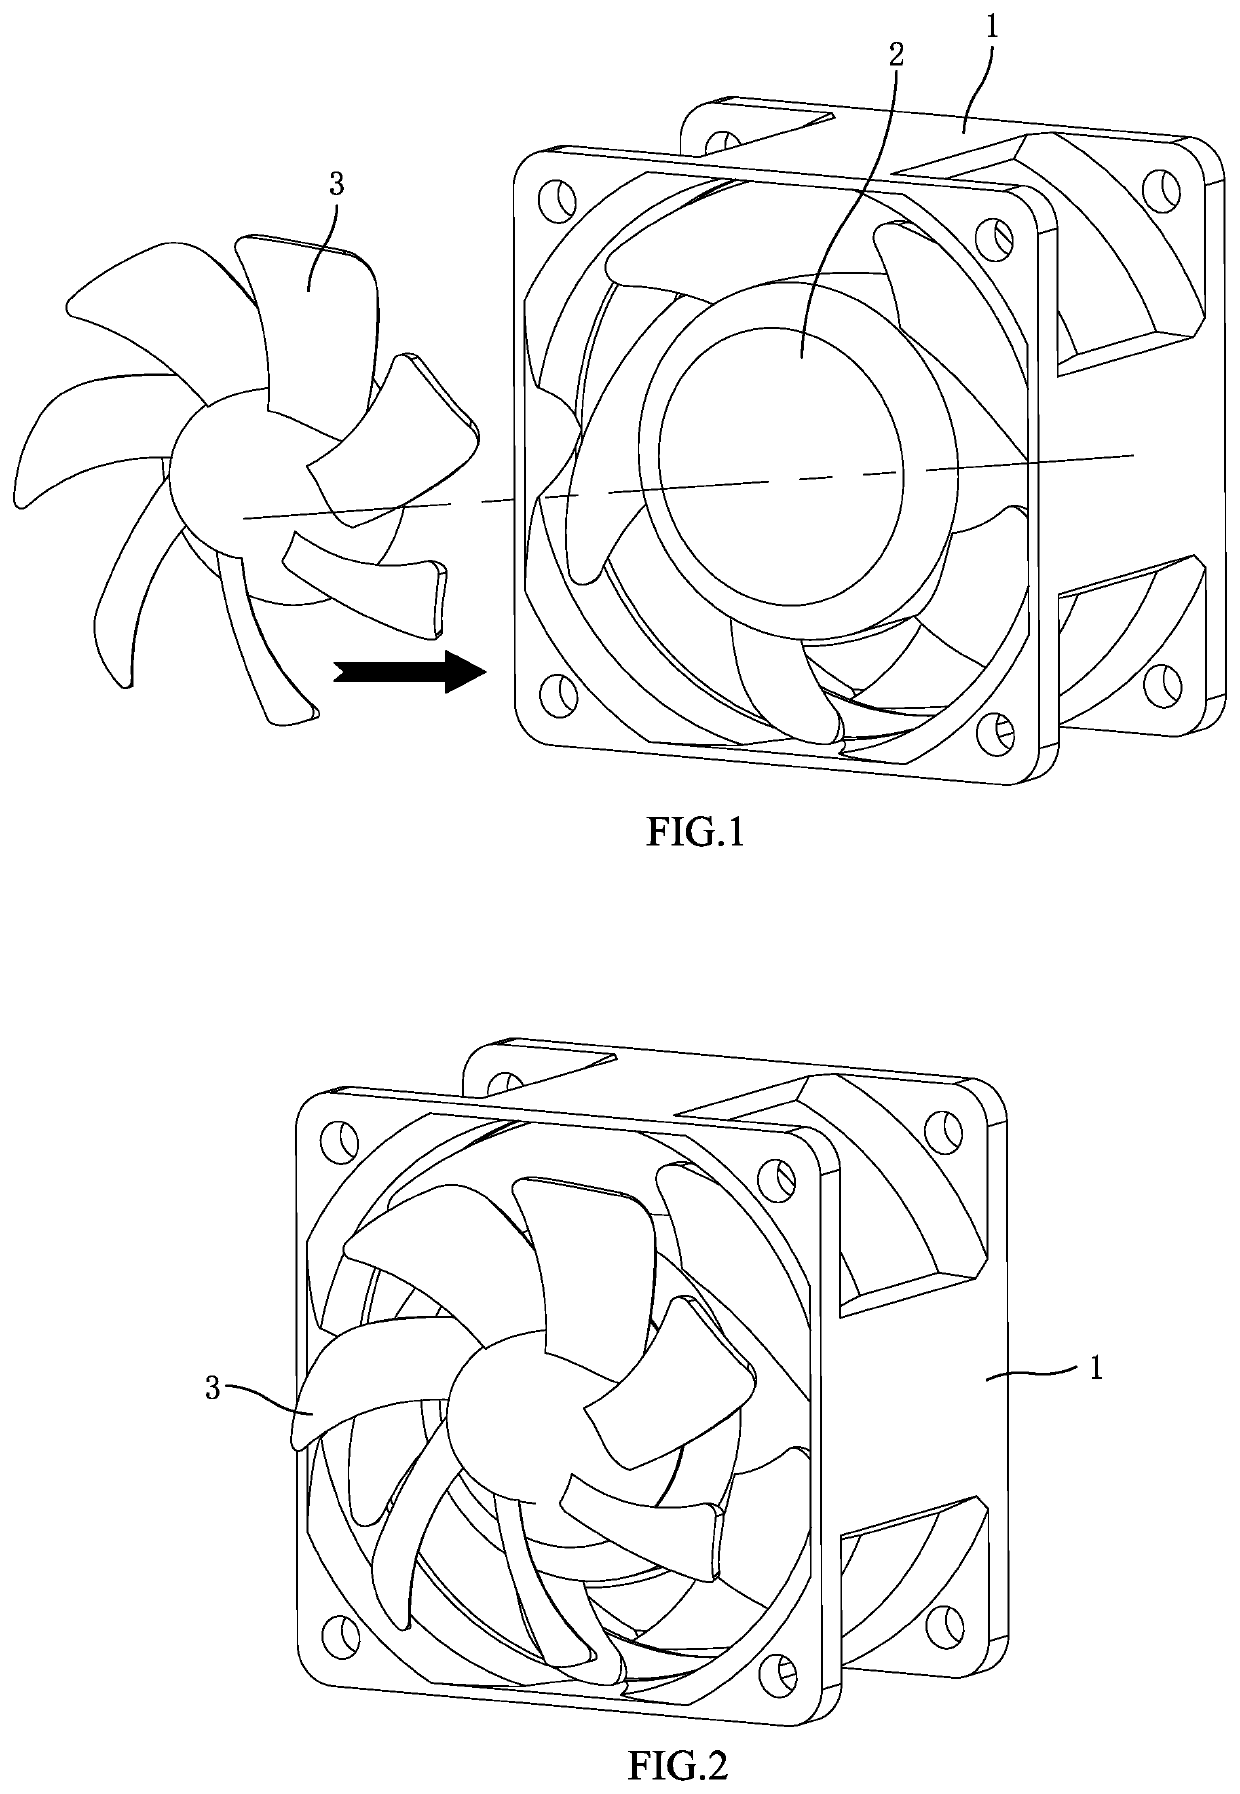 Pressurized cooling fan and instructions for use